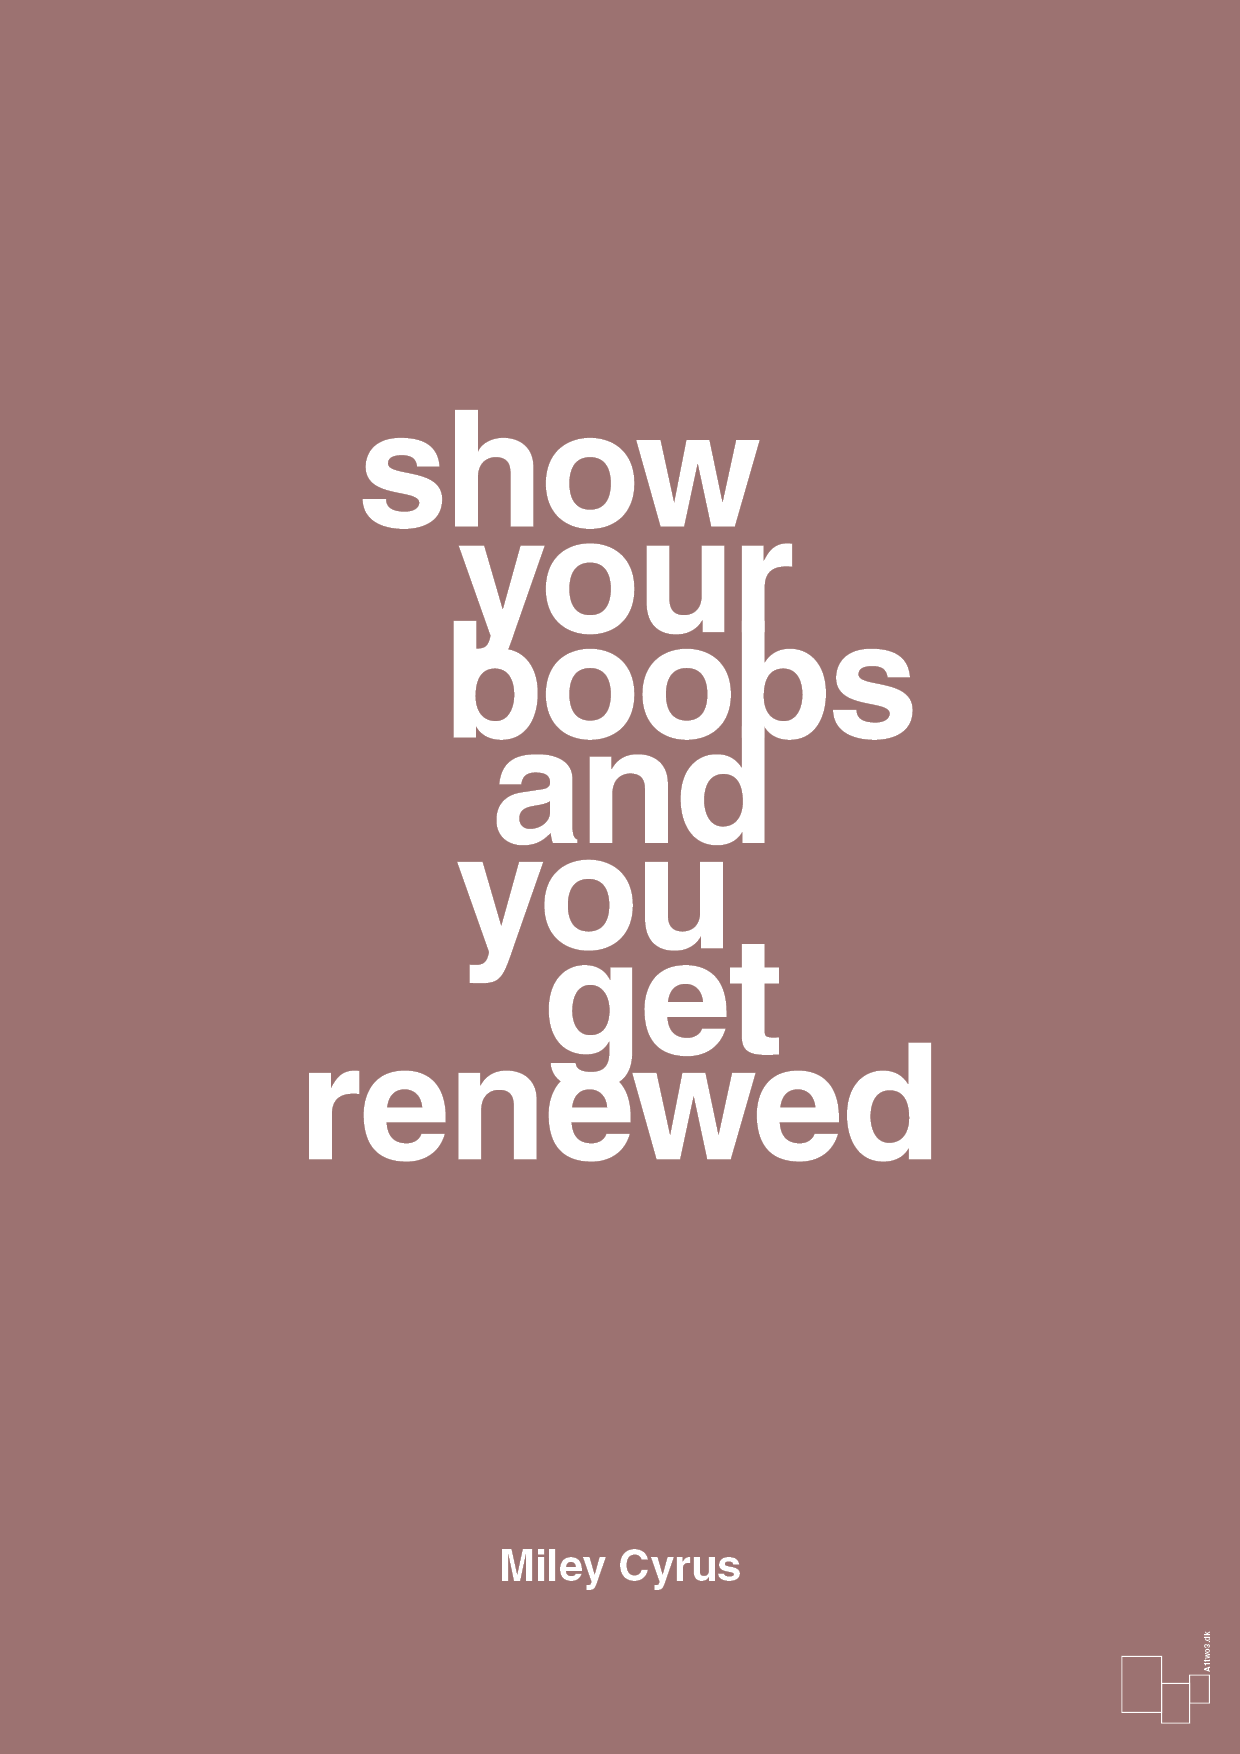 show your boobs and you get renewed - Plakat med Citater i Plum